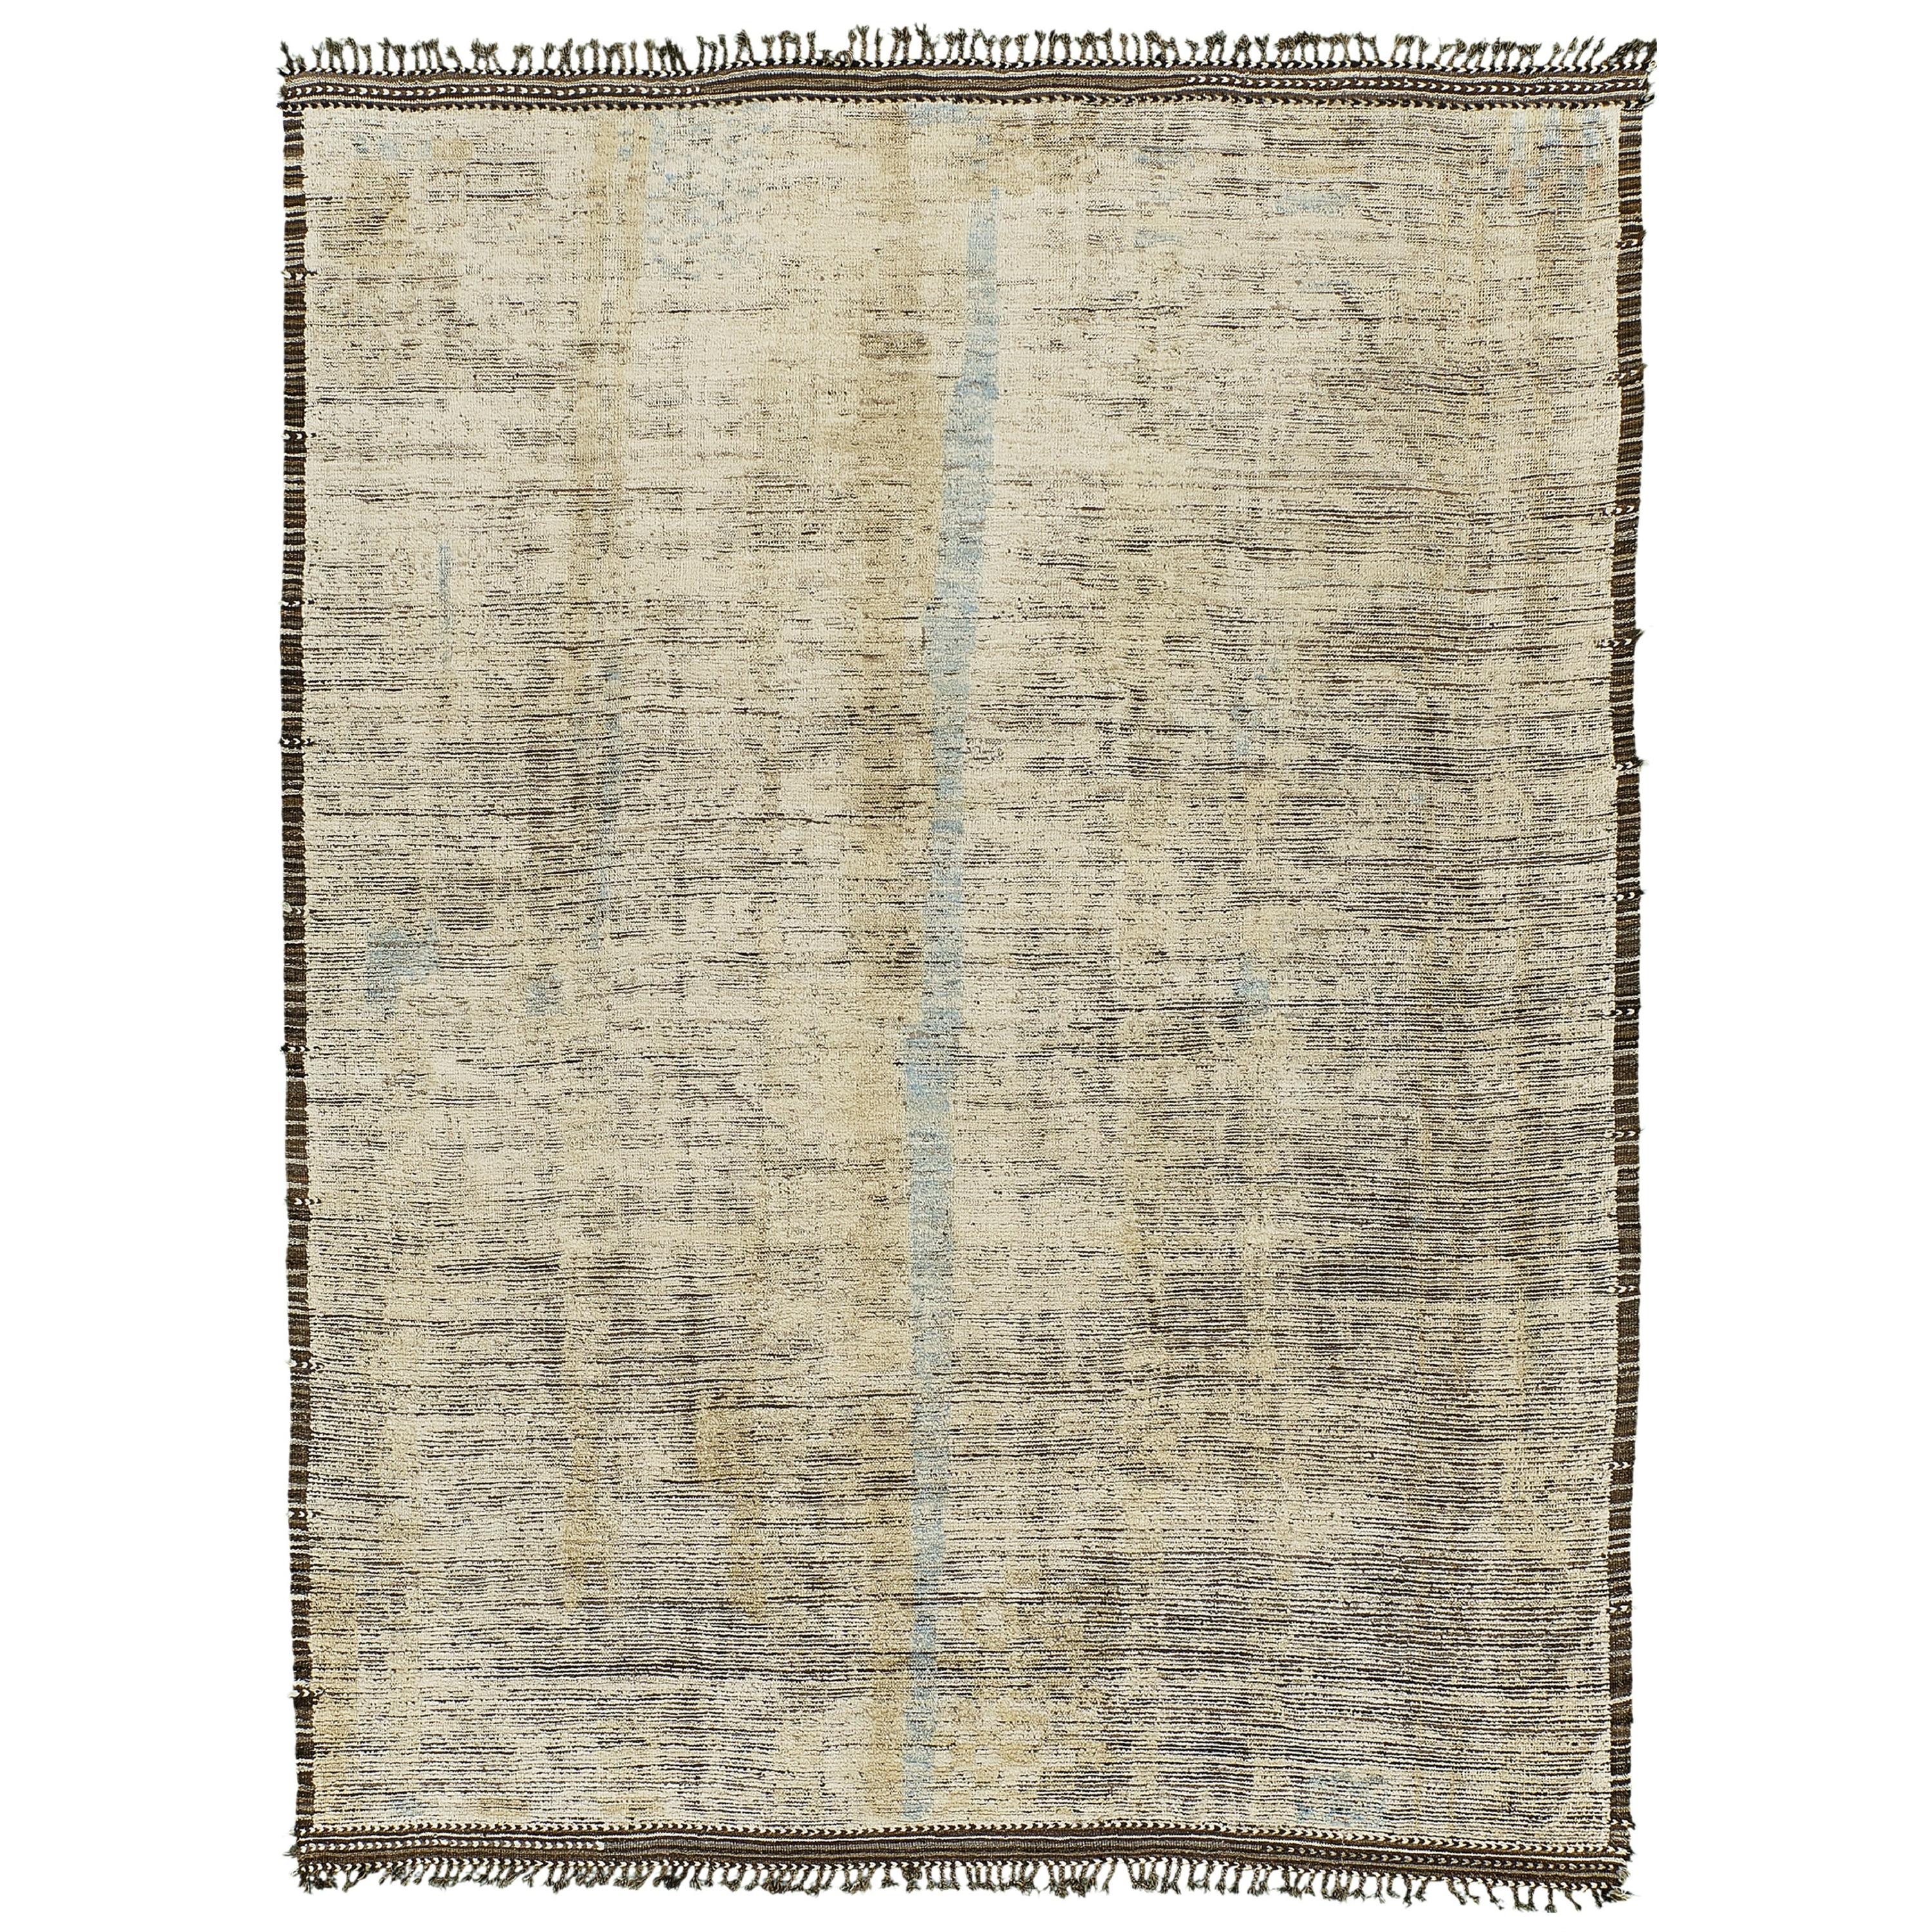 Nazmiyal Collection Decorative Modern Distressed Rug 9 ft 8 in x 13 ft 4 in